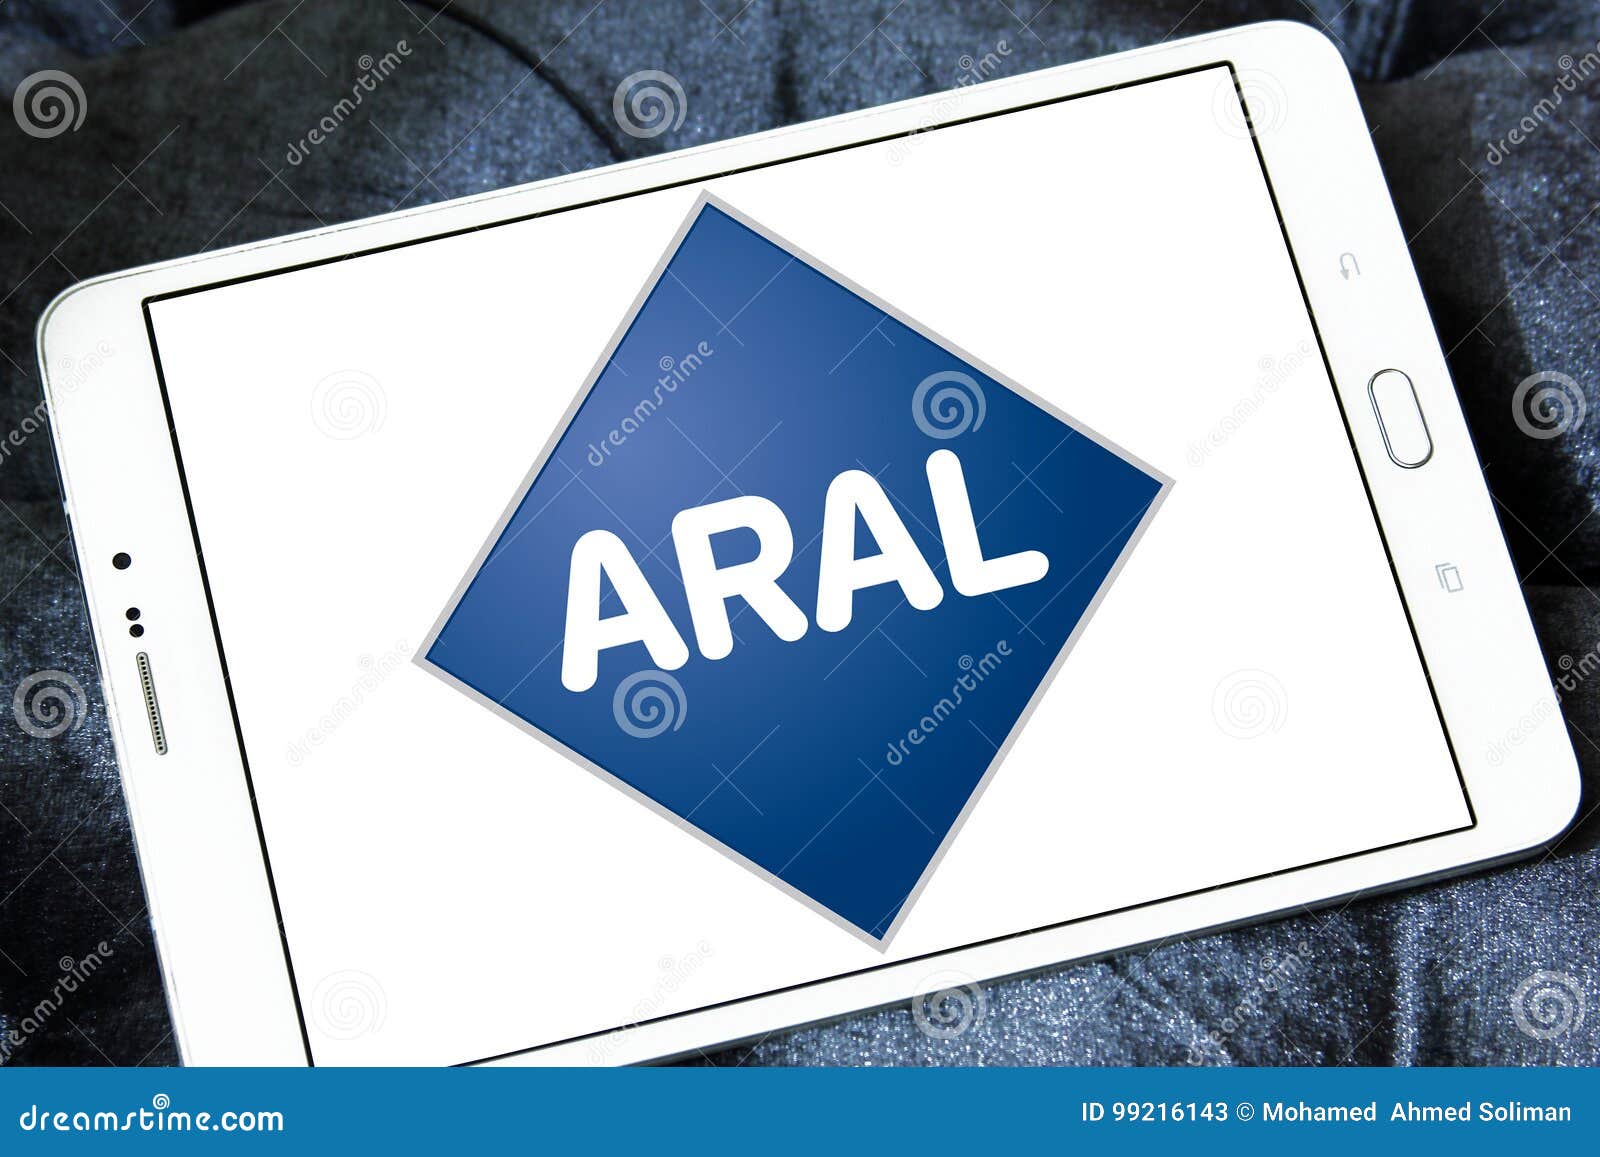 Aral oil company logo editorial stock photo. Image of luxembourg - 99216143